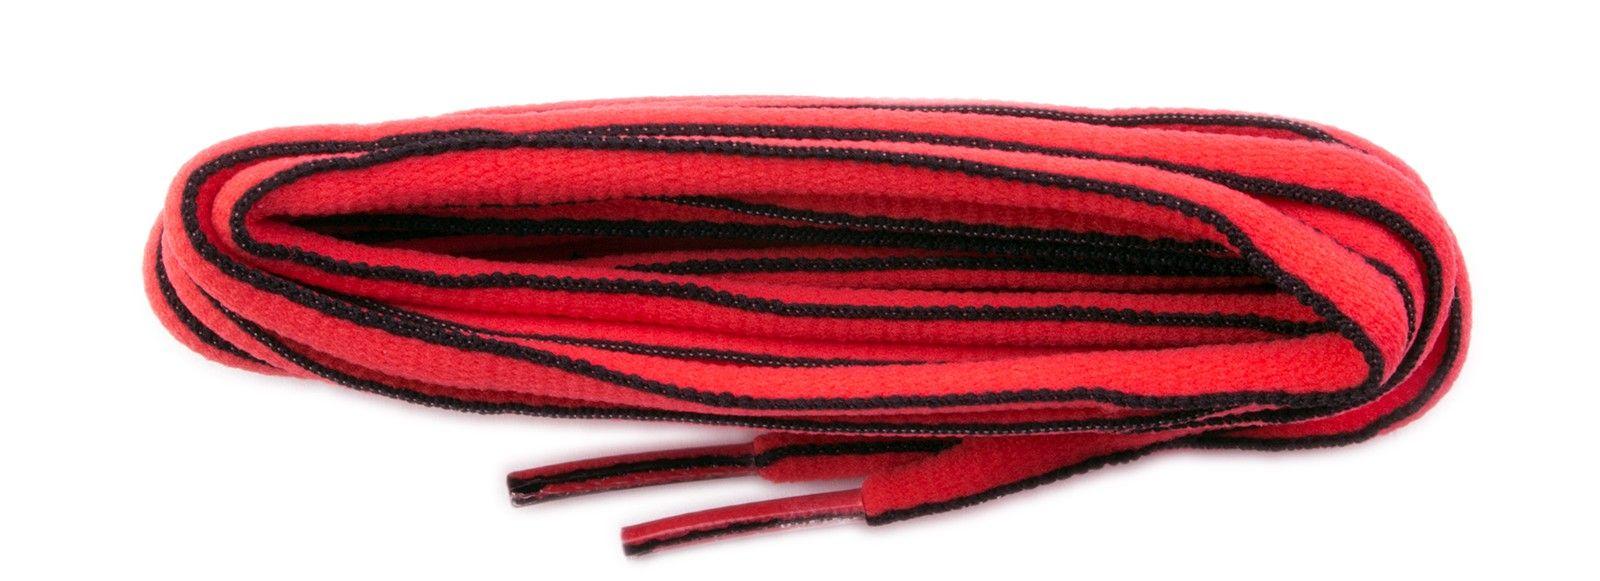 Red Oval Sports Logo - Red/black Edge Oval Sports Laces | Victor de Banke